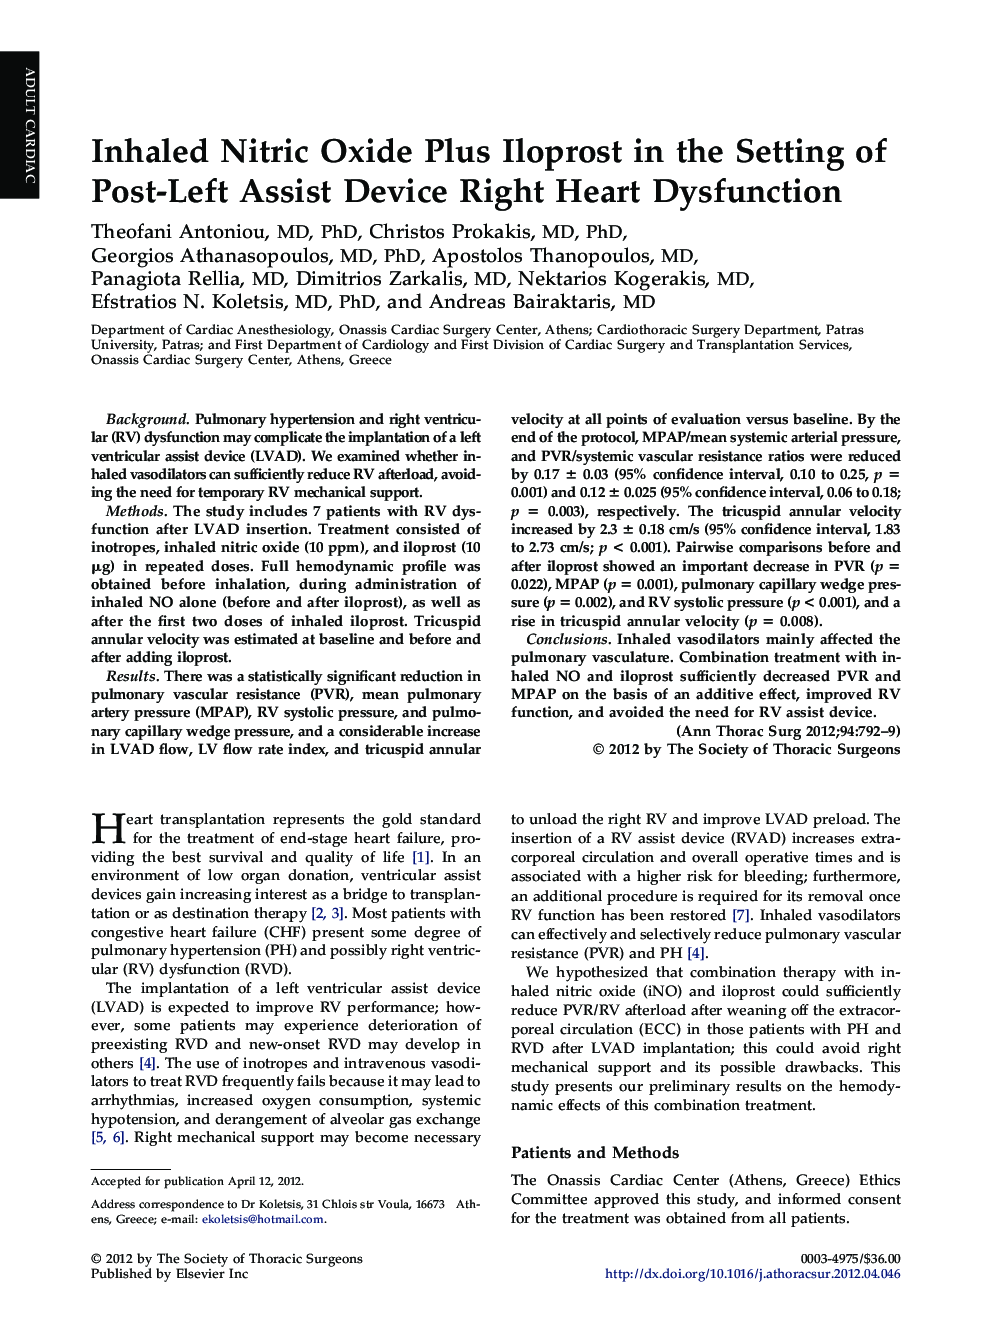 Inhaled Nitric Oxide Plus Iloprost in the Setting of Post-Left Assist Device Right Heart Dysfunction